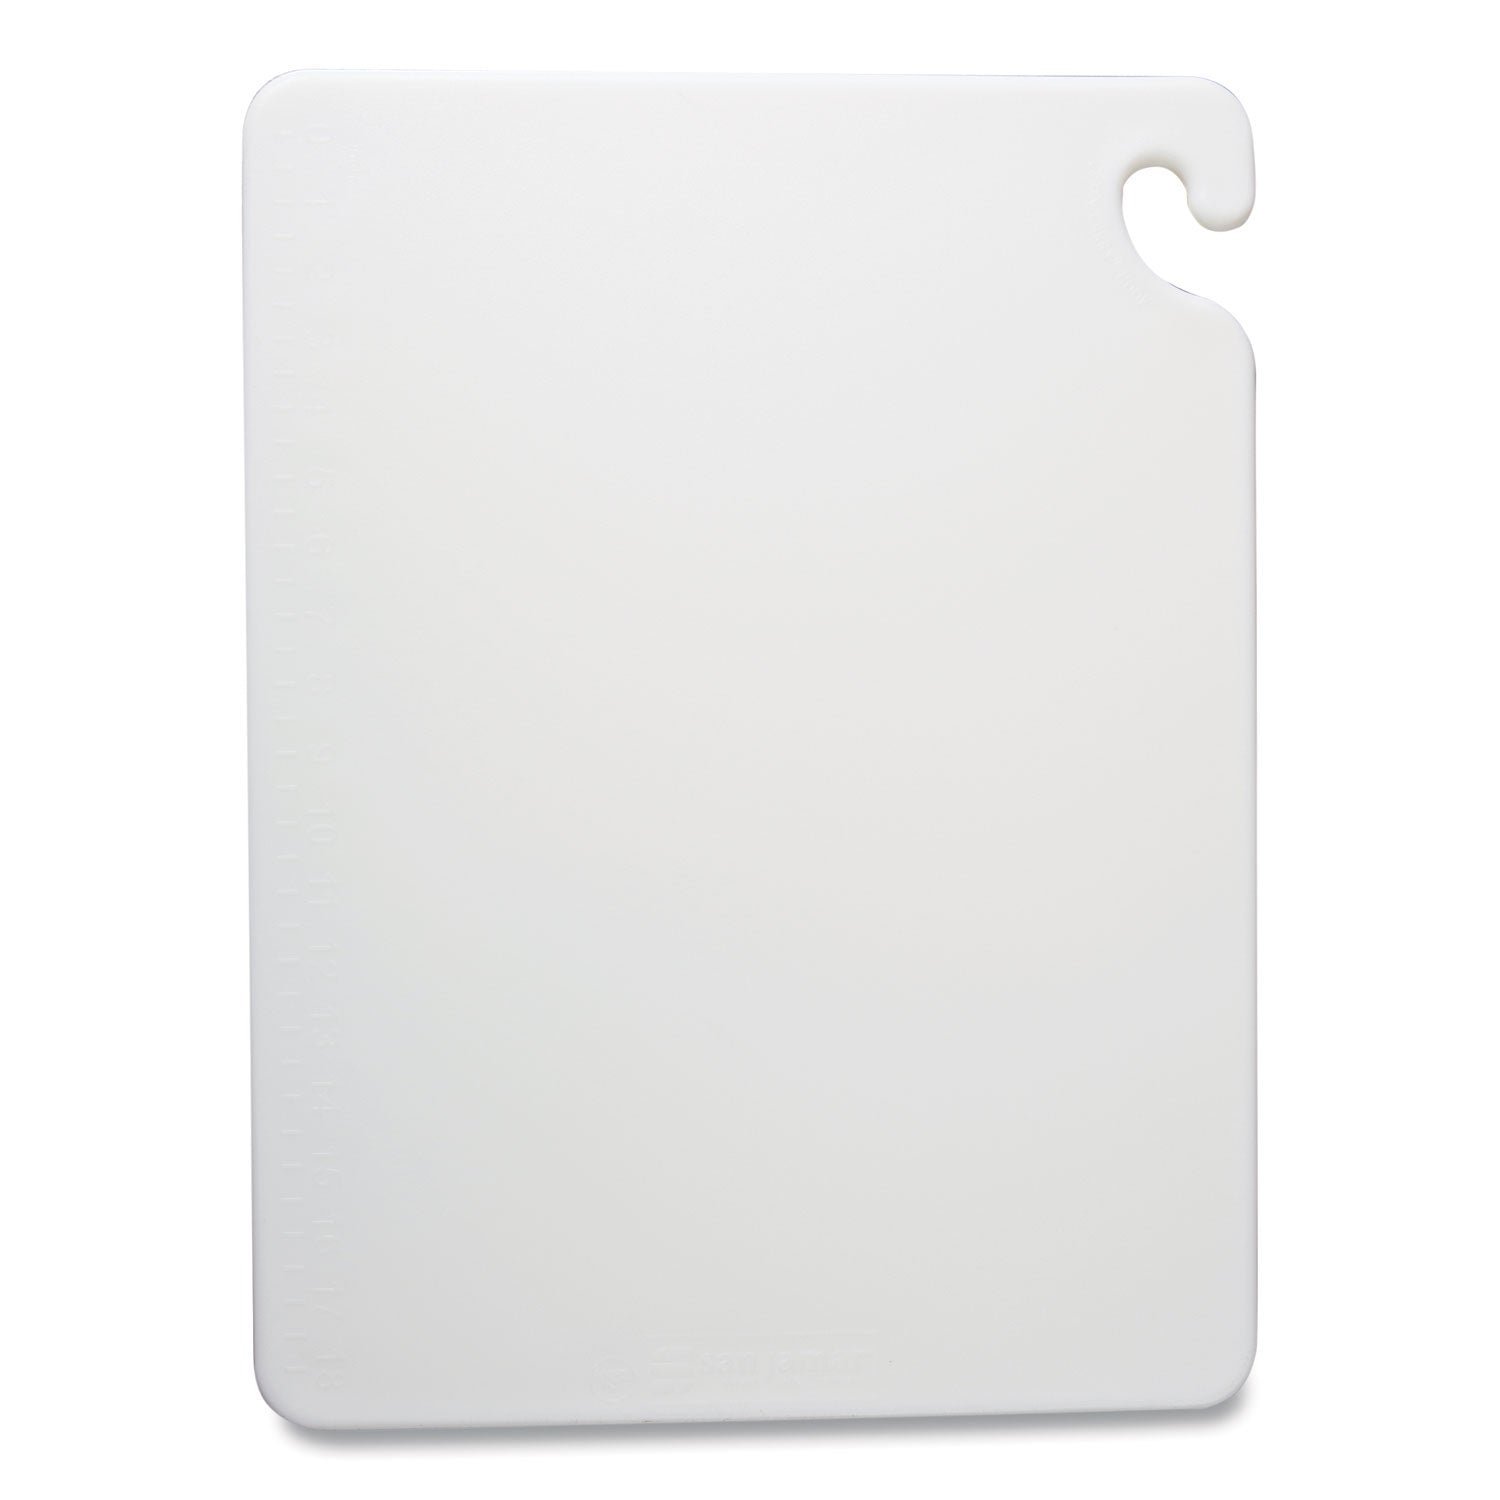 cut-n-carry-color-cutting-boards-plastic-20-x-15-x-05-white_sjmcb152012wh - 1